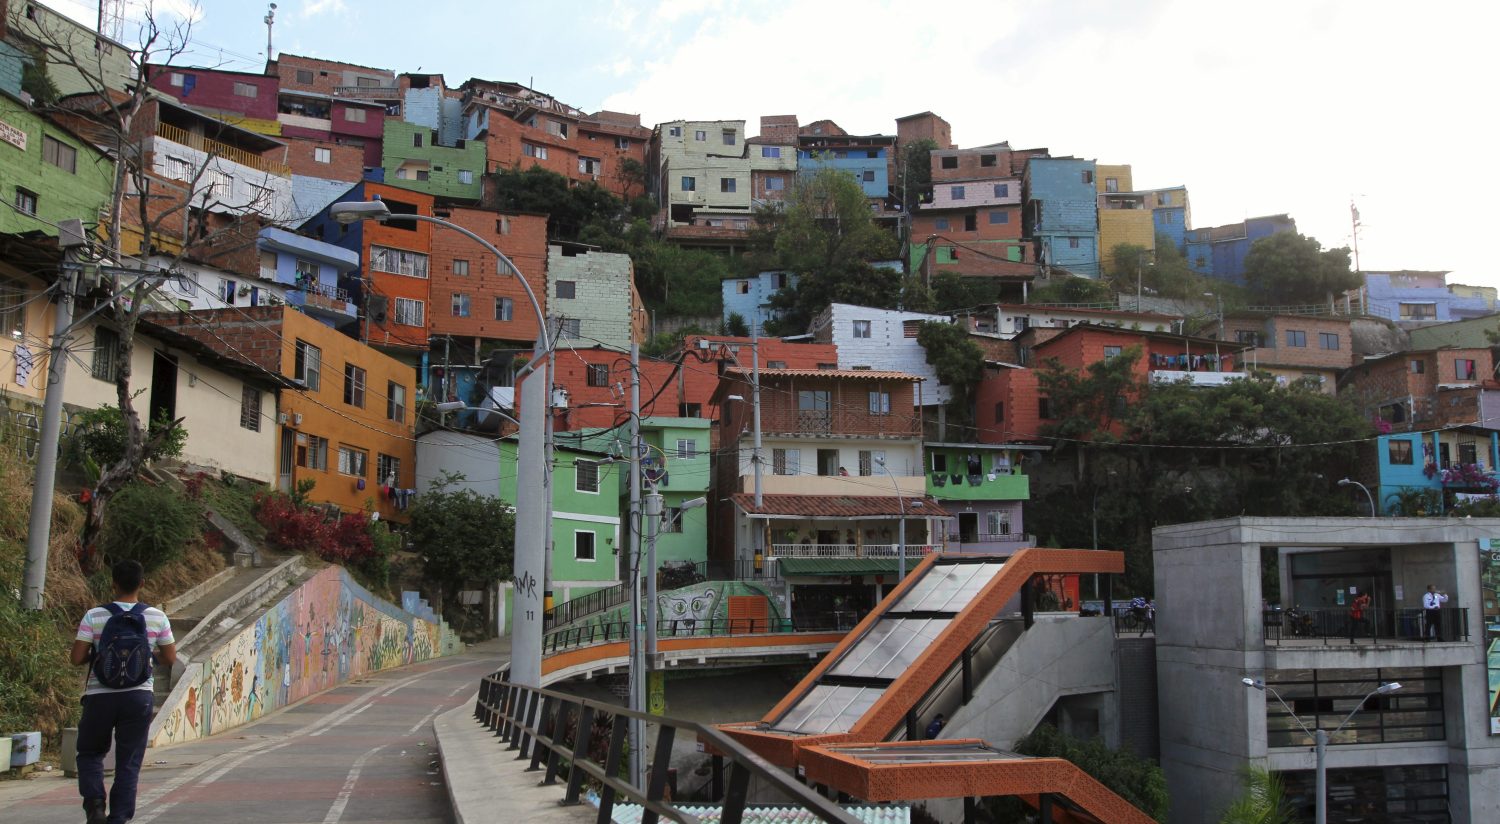 A man walks in the "Comuna 13" neighborhood in Medellin September 2, 2015. Picture taken September 2, 2015. To match DEVELOPMENT-GOALS/COLOMBIA-CITIES REUTERS/Fredy Builes - RTSE9A